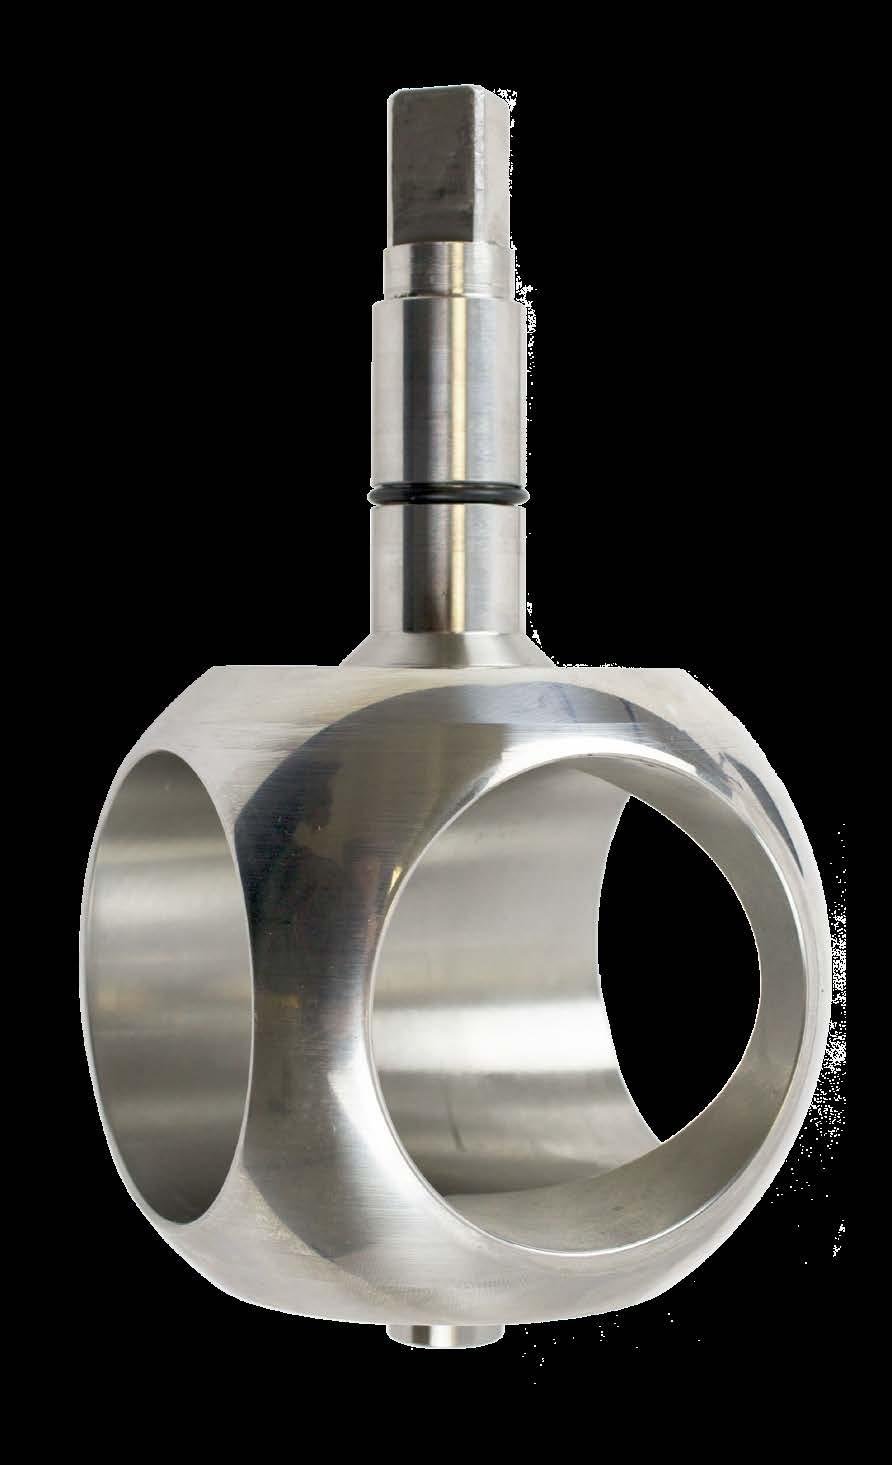 All valves feature the primary packing stem seal as well as a secondary o-ring stem seal between the stem and body to guarantee no external leakage.